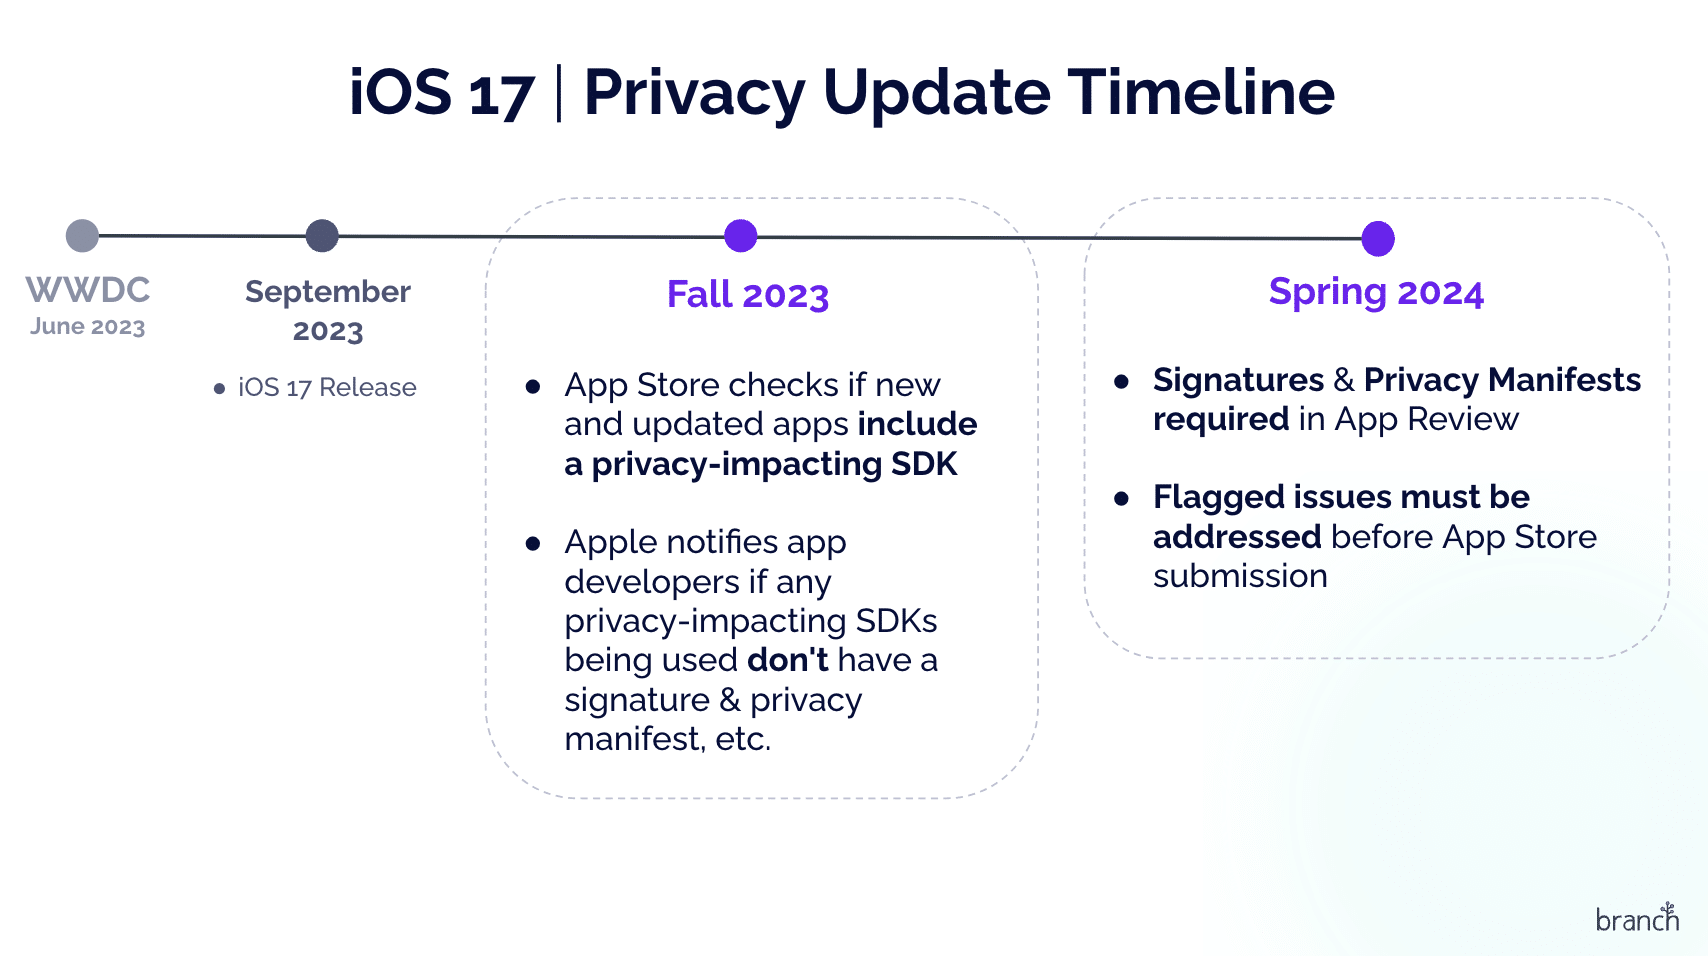 Apple's privacy update timeline: Fall 2023: App Store checks if new an updated apps include a privacy-impacting SDK. Apple notifies app developers if any privacy-impacting SDKs being used don't have a signature, privacy manifest, etc. Spring 2024: Signatures and Privacy Manifests required in App Review. Flagged issues must be addressed before App Store submission.